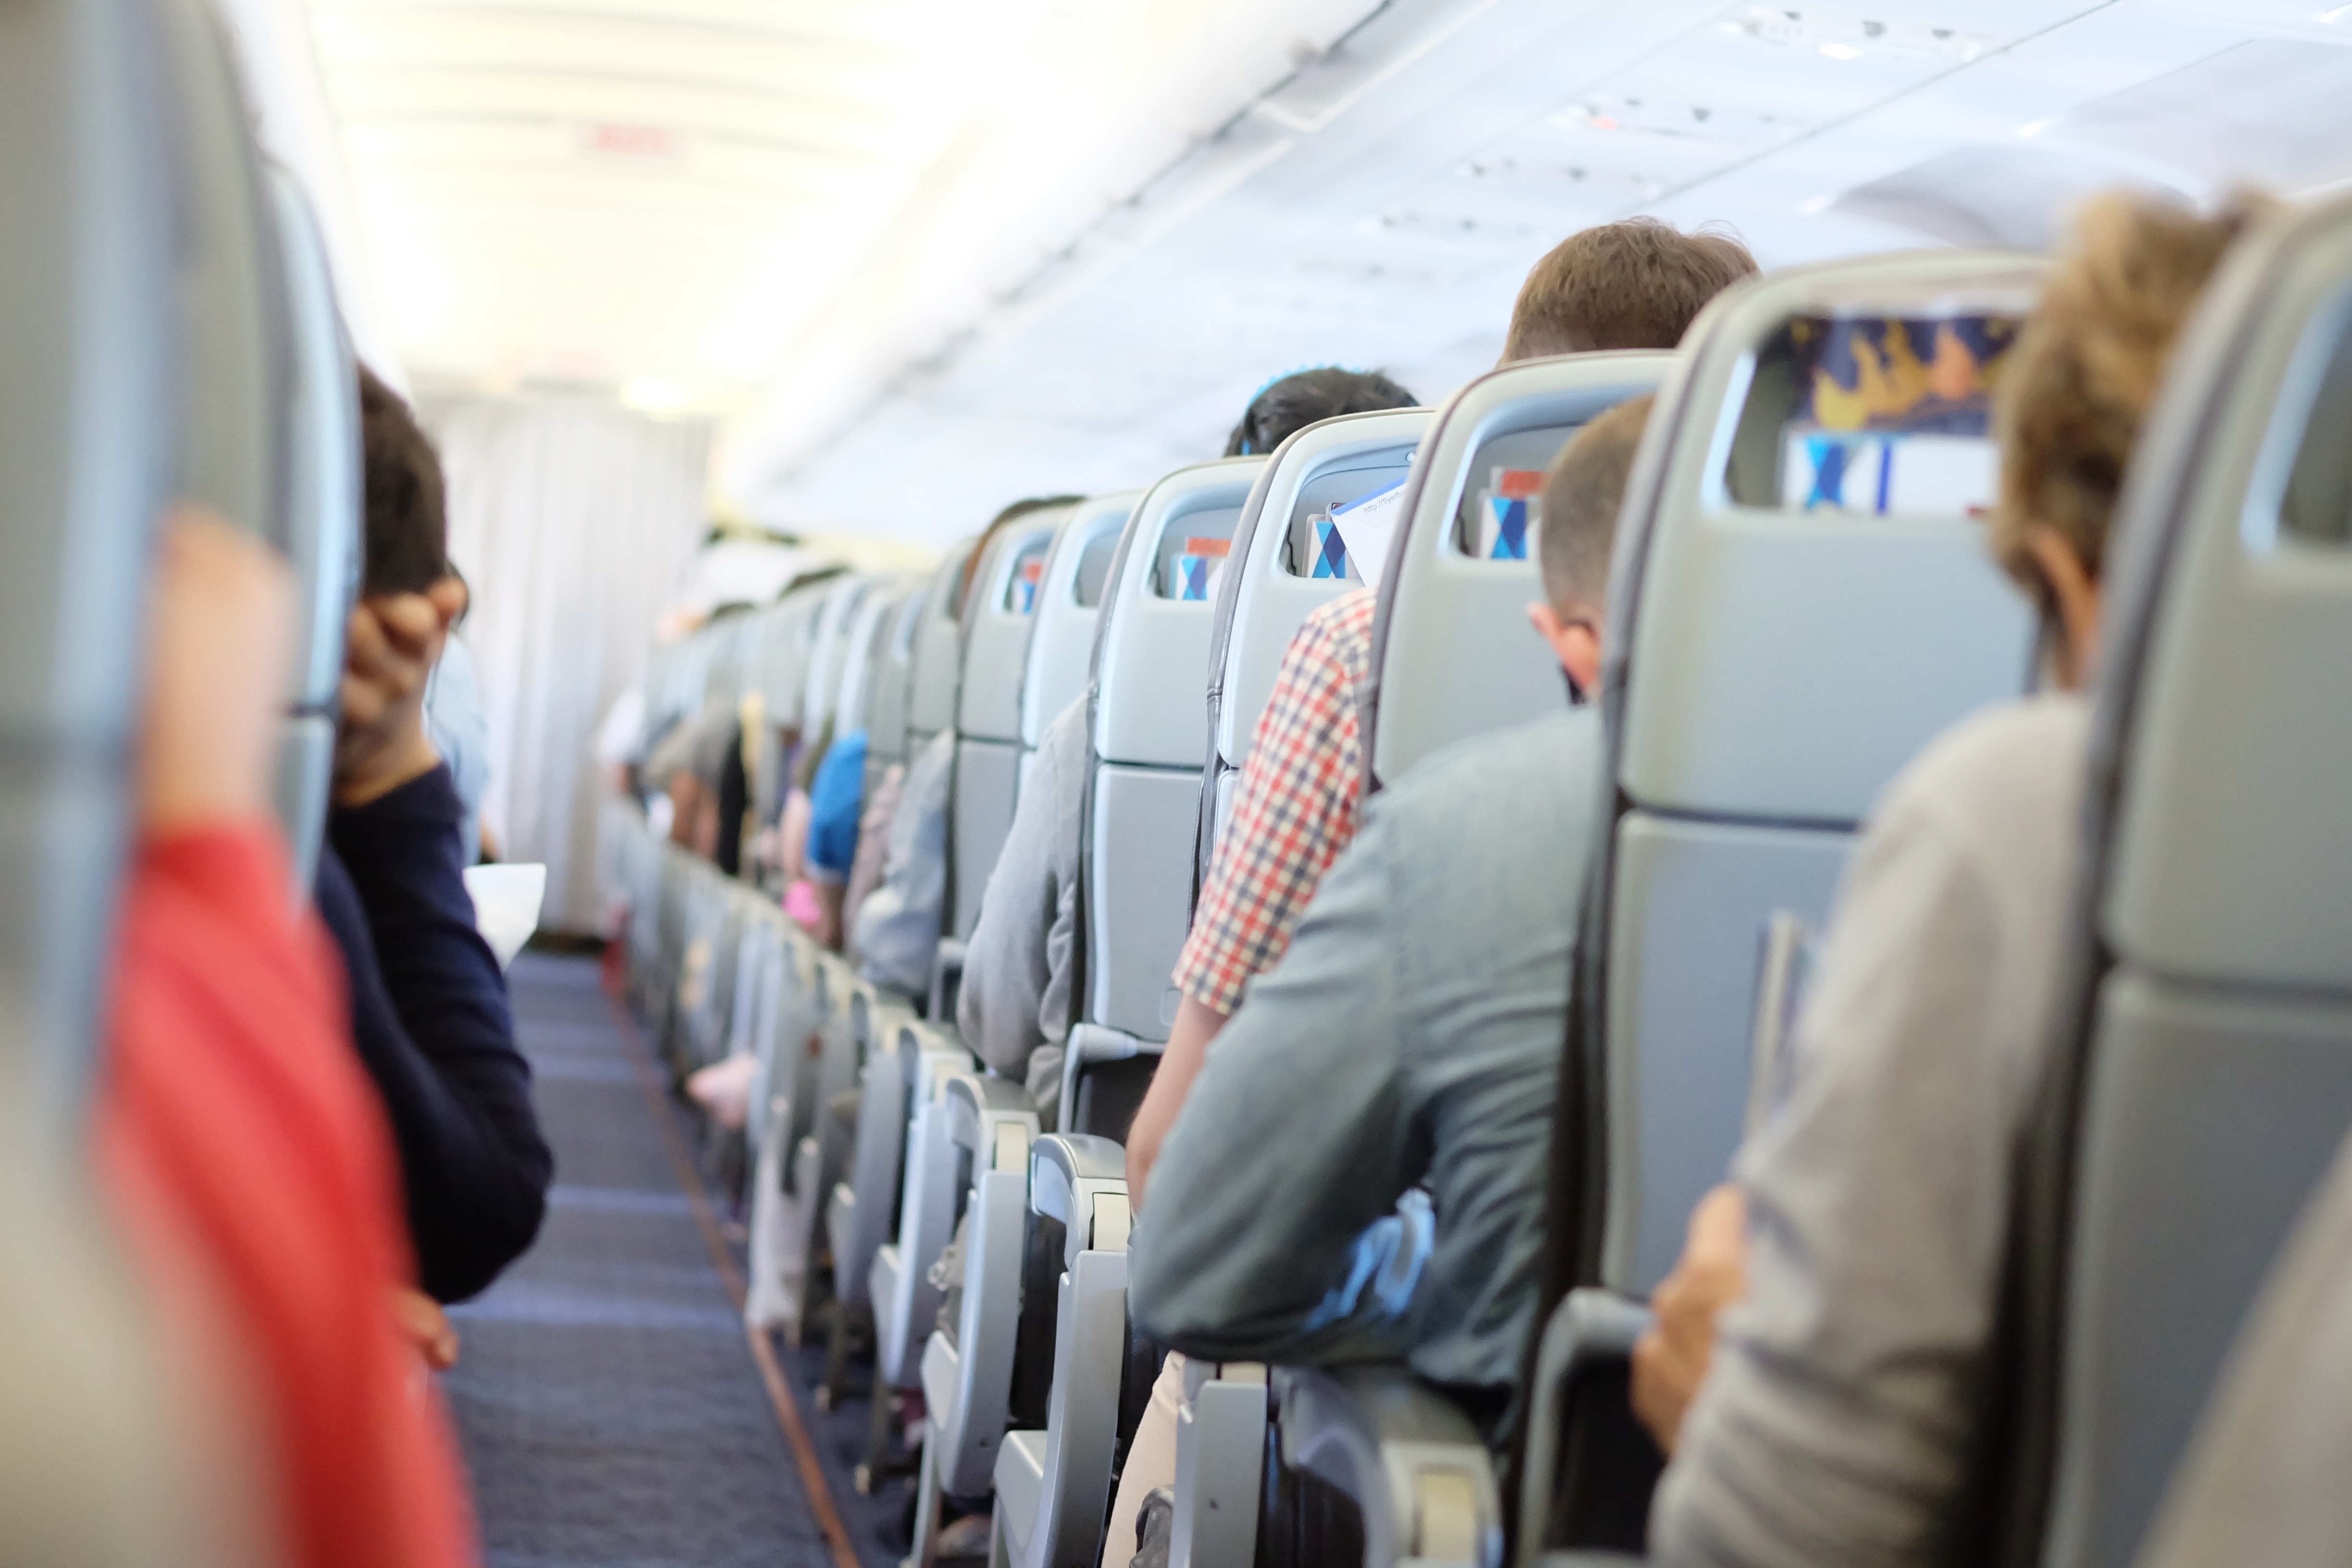 Passengers in an airplane | Source: Shutterstock